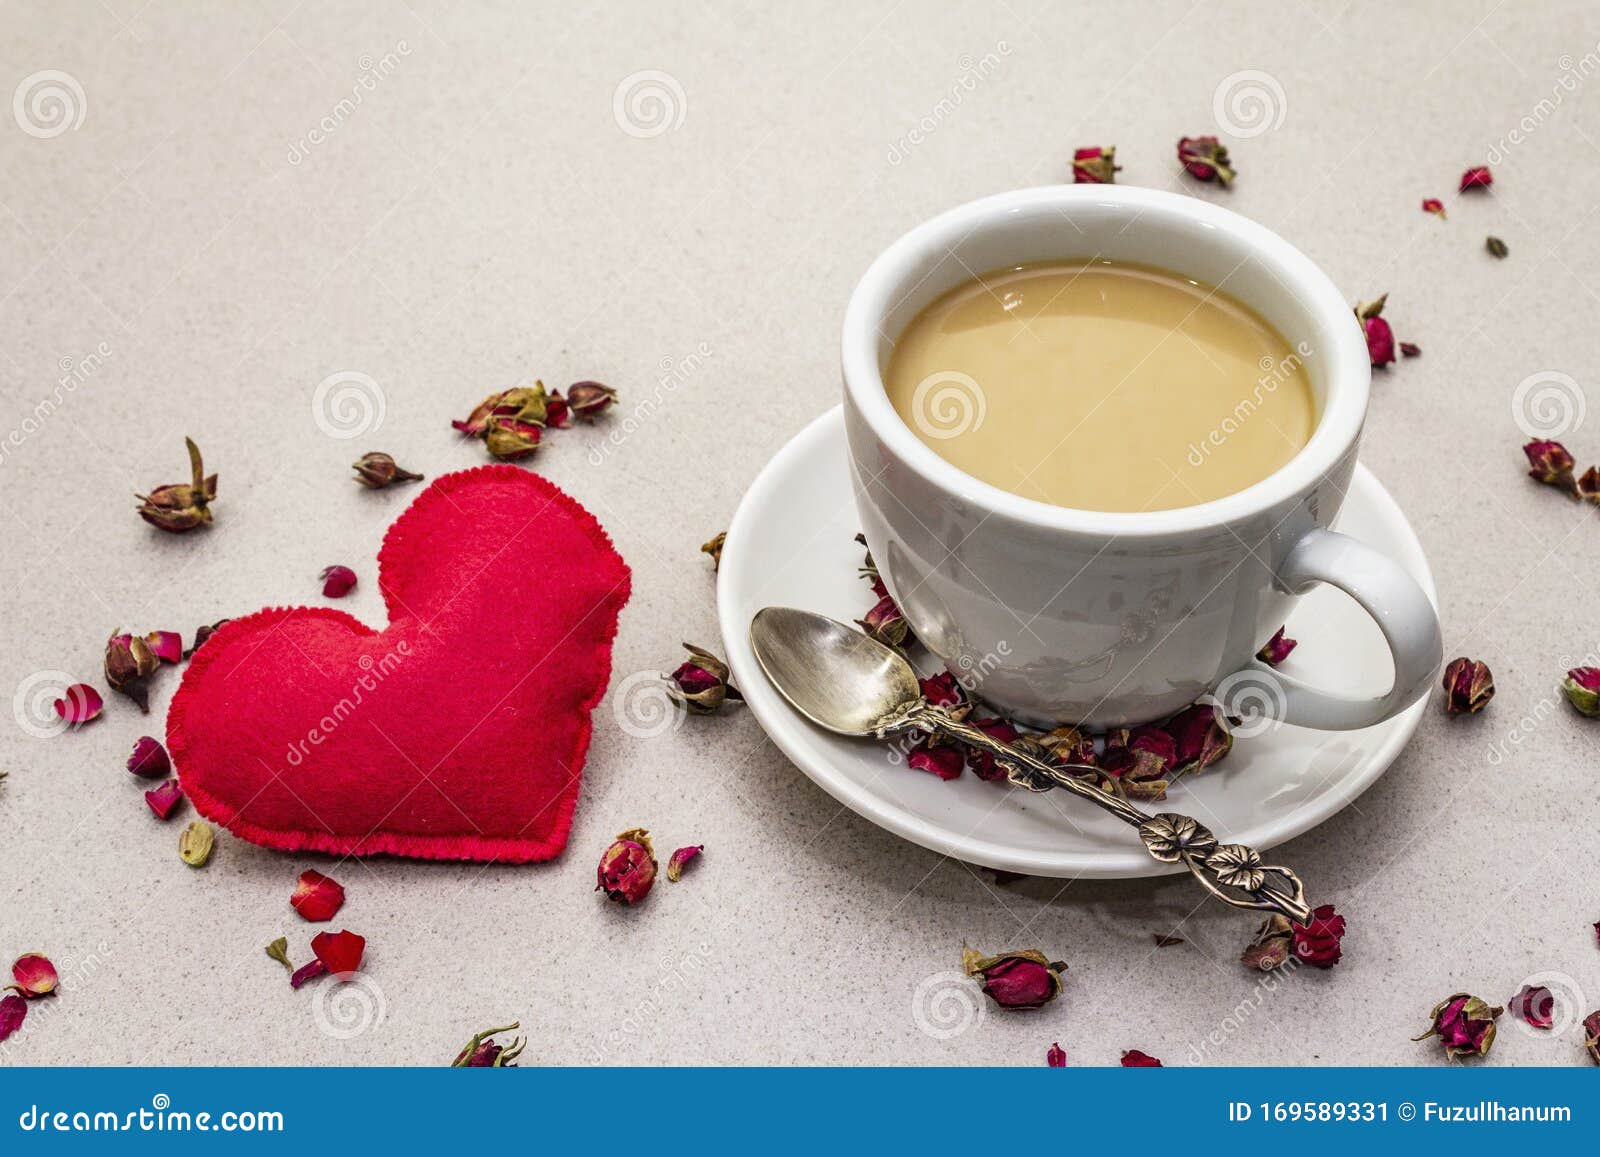 Good Morning. Cup of Coffee, Rose Buds and Petals, Red Felt Heart ...